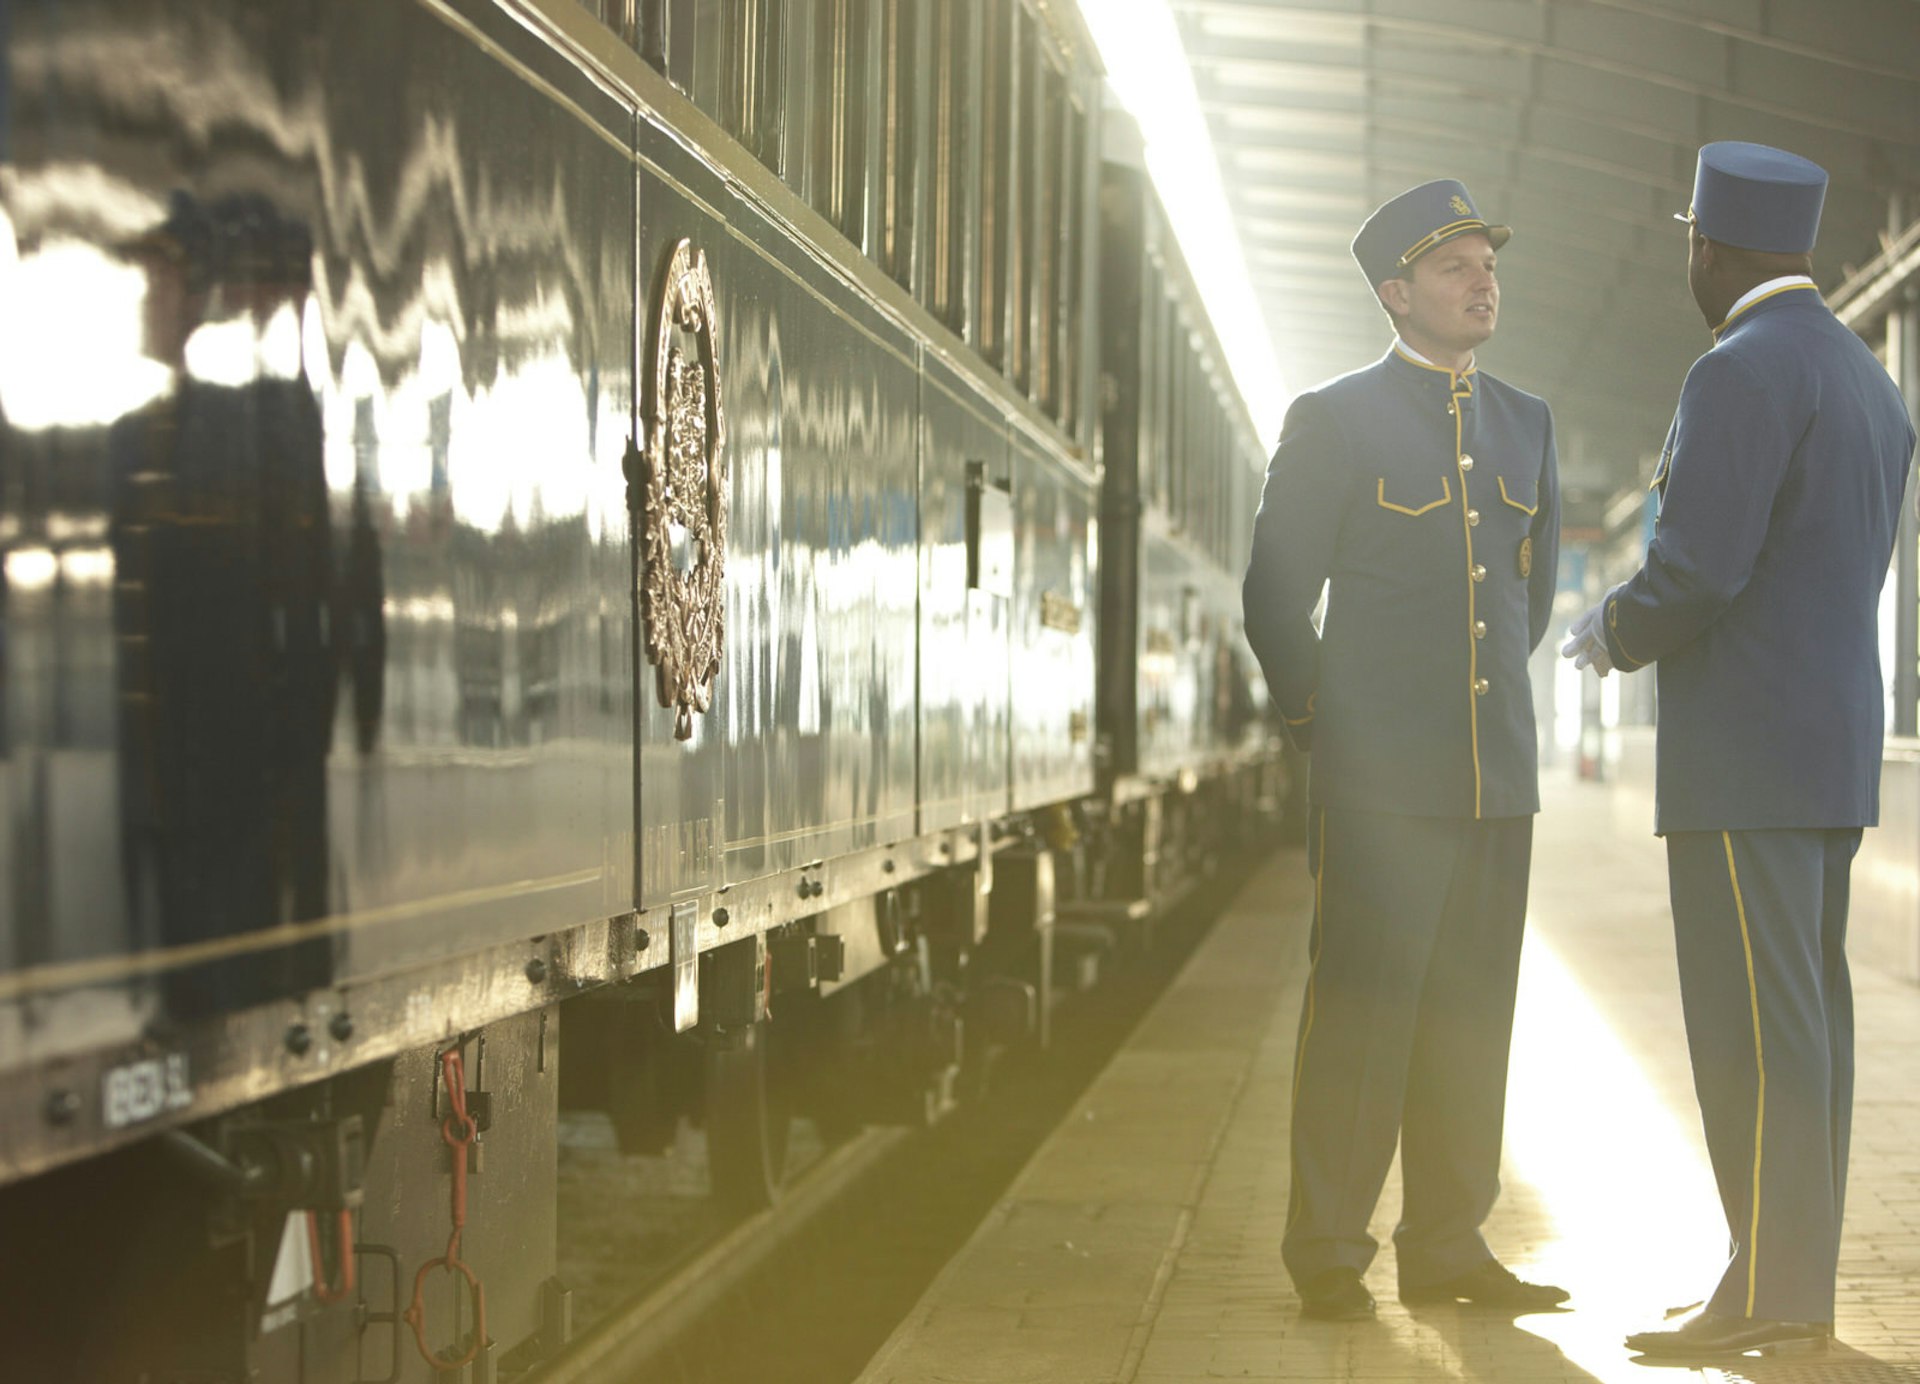 Station attendants beside Orient Express at station